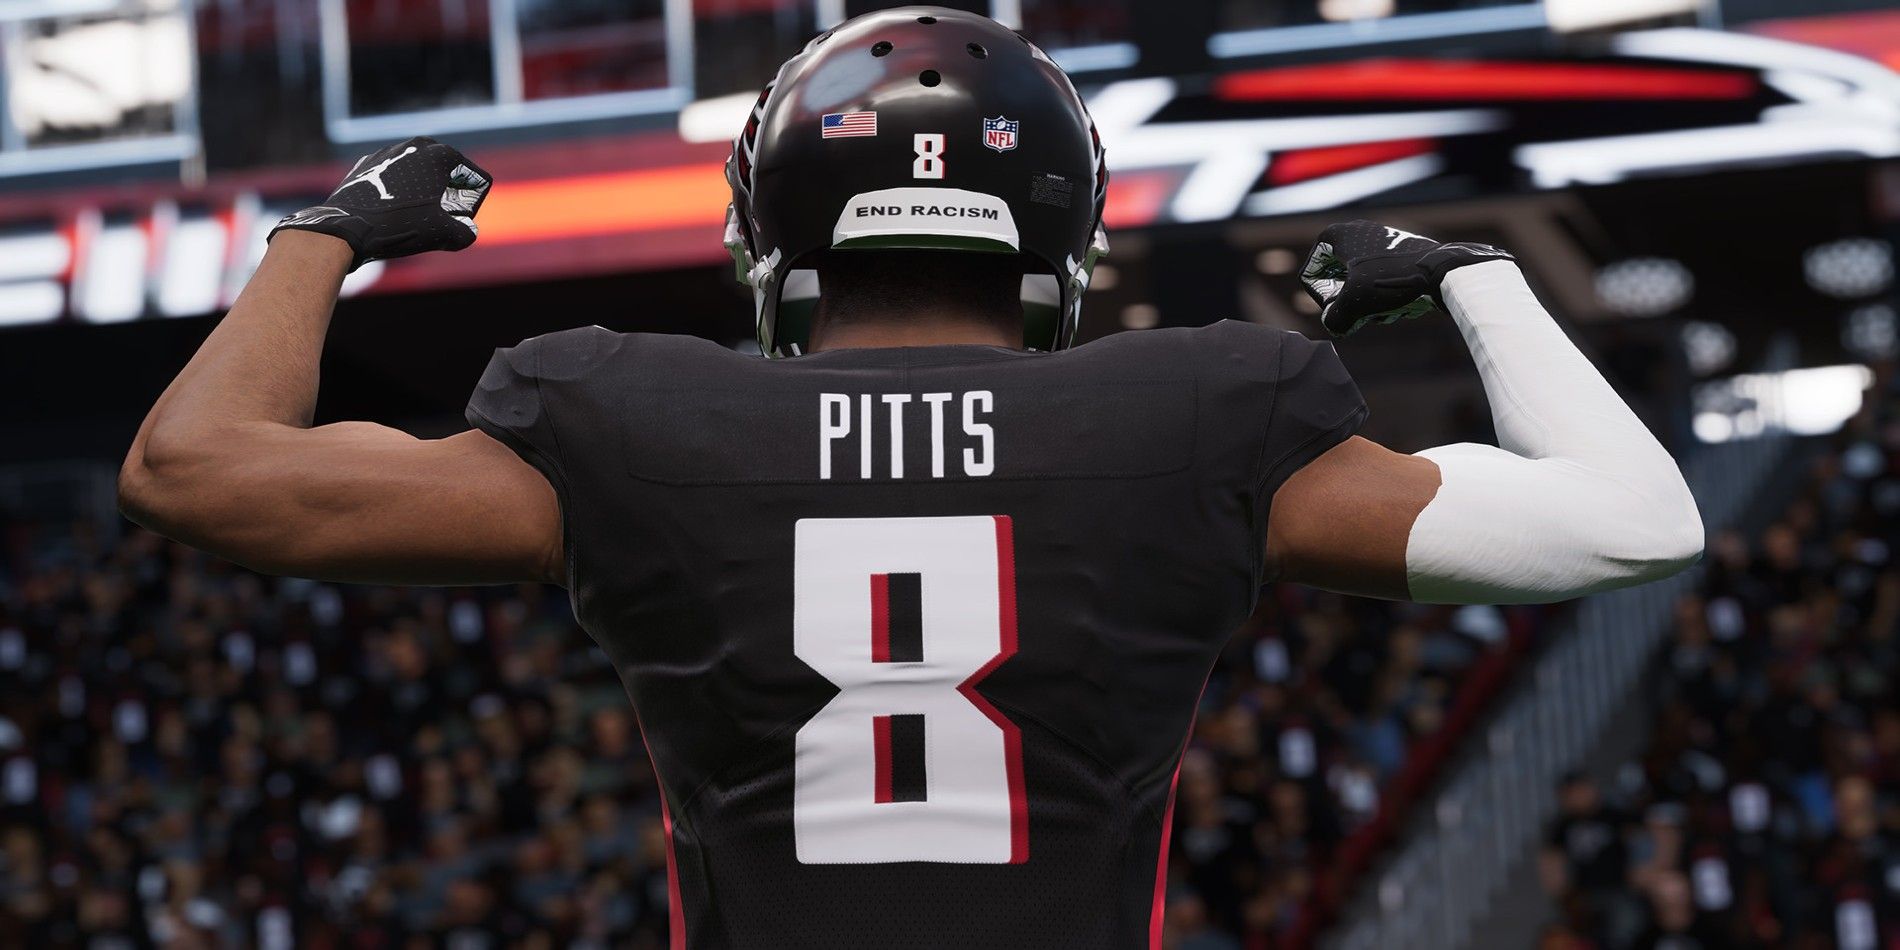 New Scouting Feature Release in Latest Madden NFL 22 Update